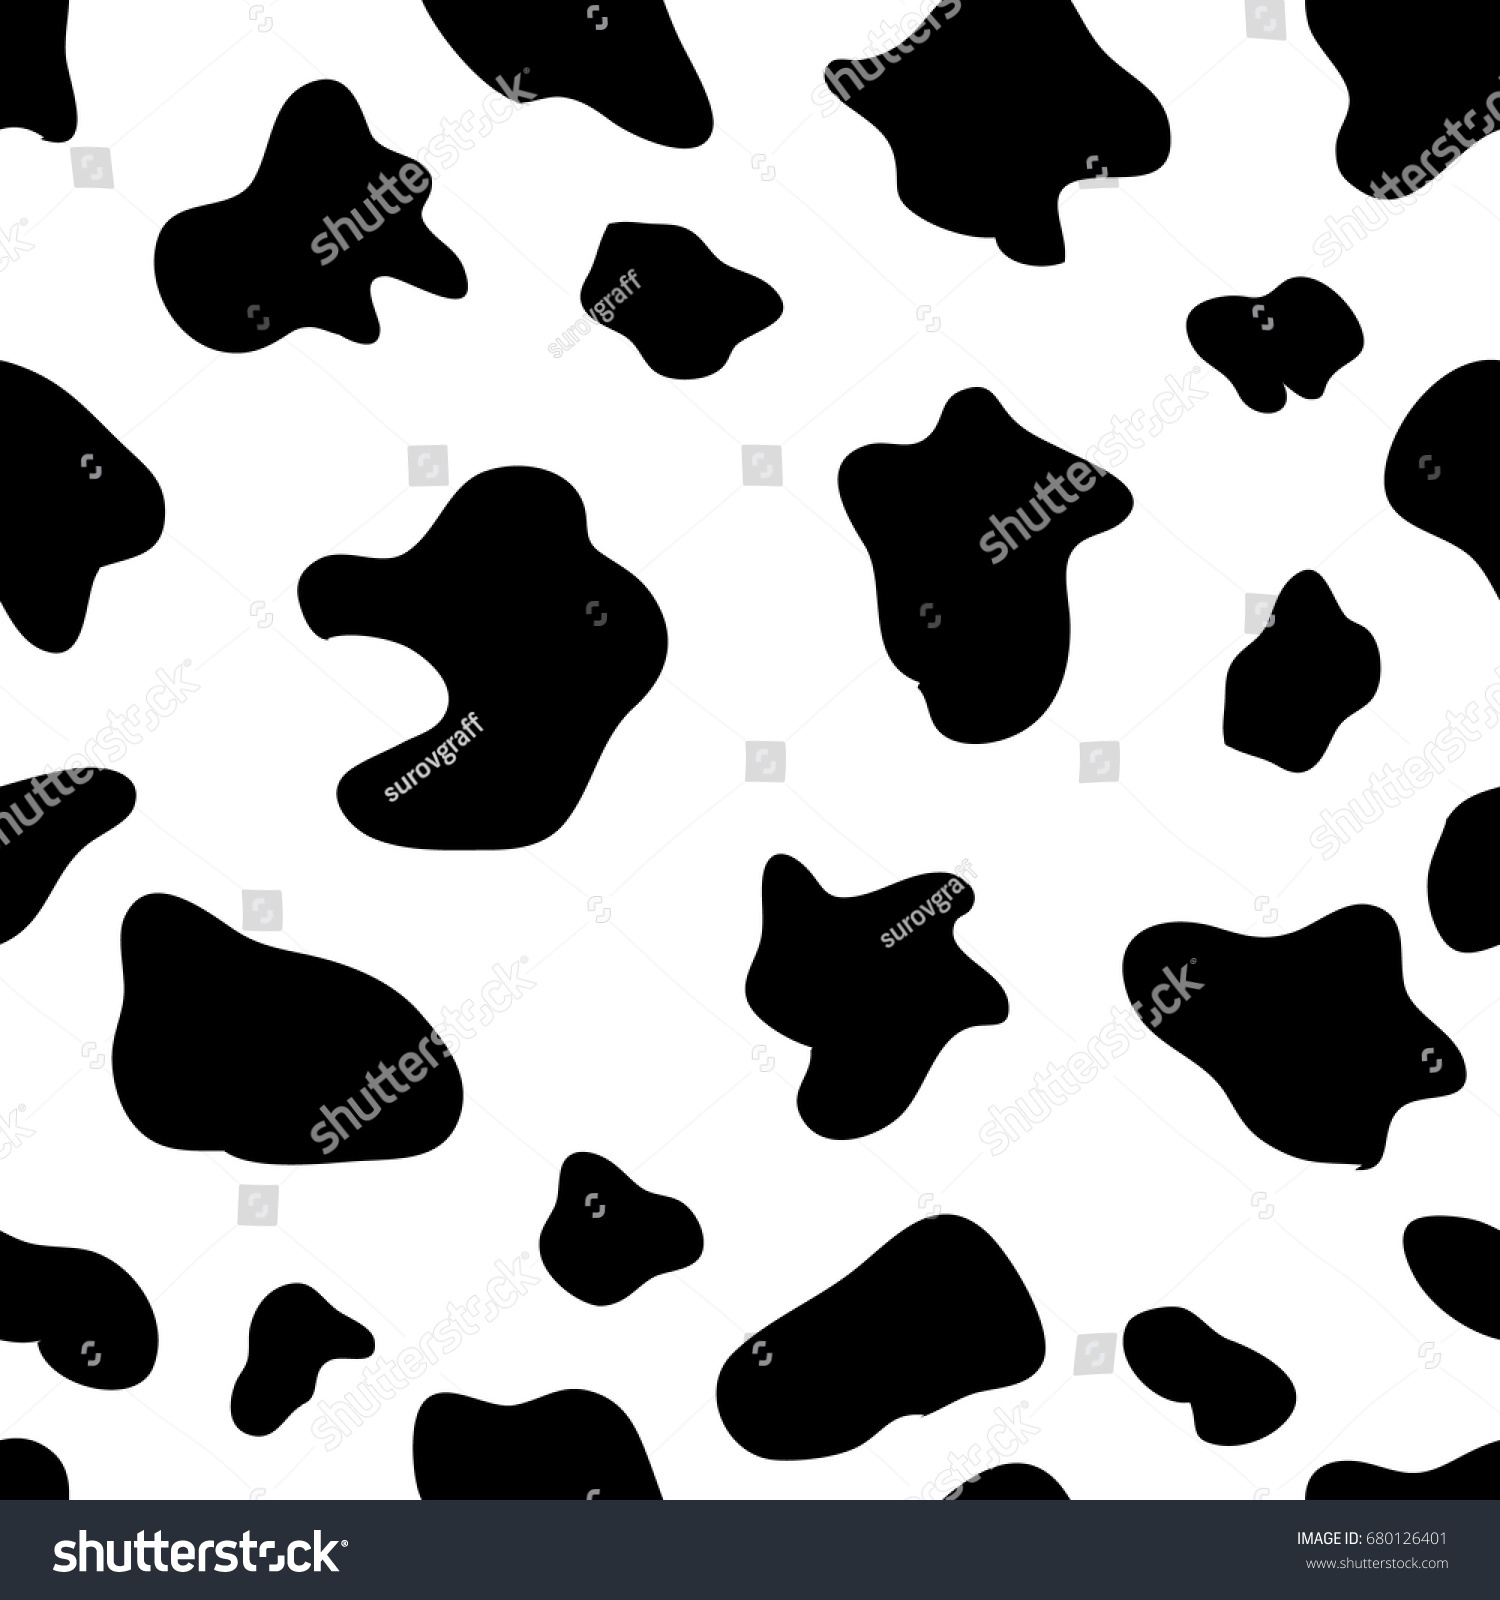 SVG of cow skin or a Dalmatians dog. svg